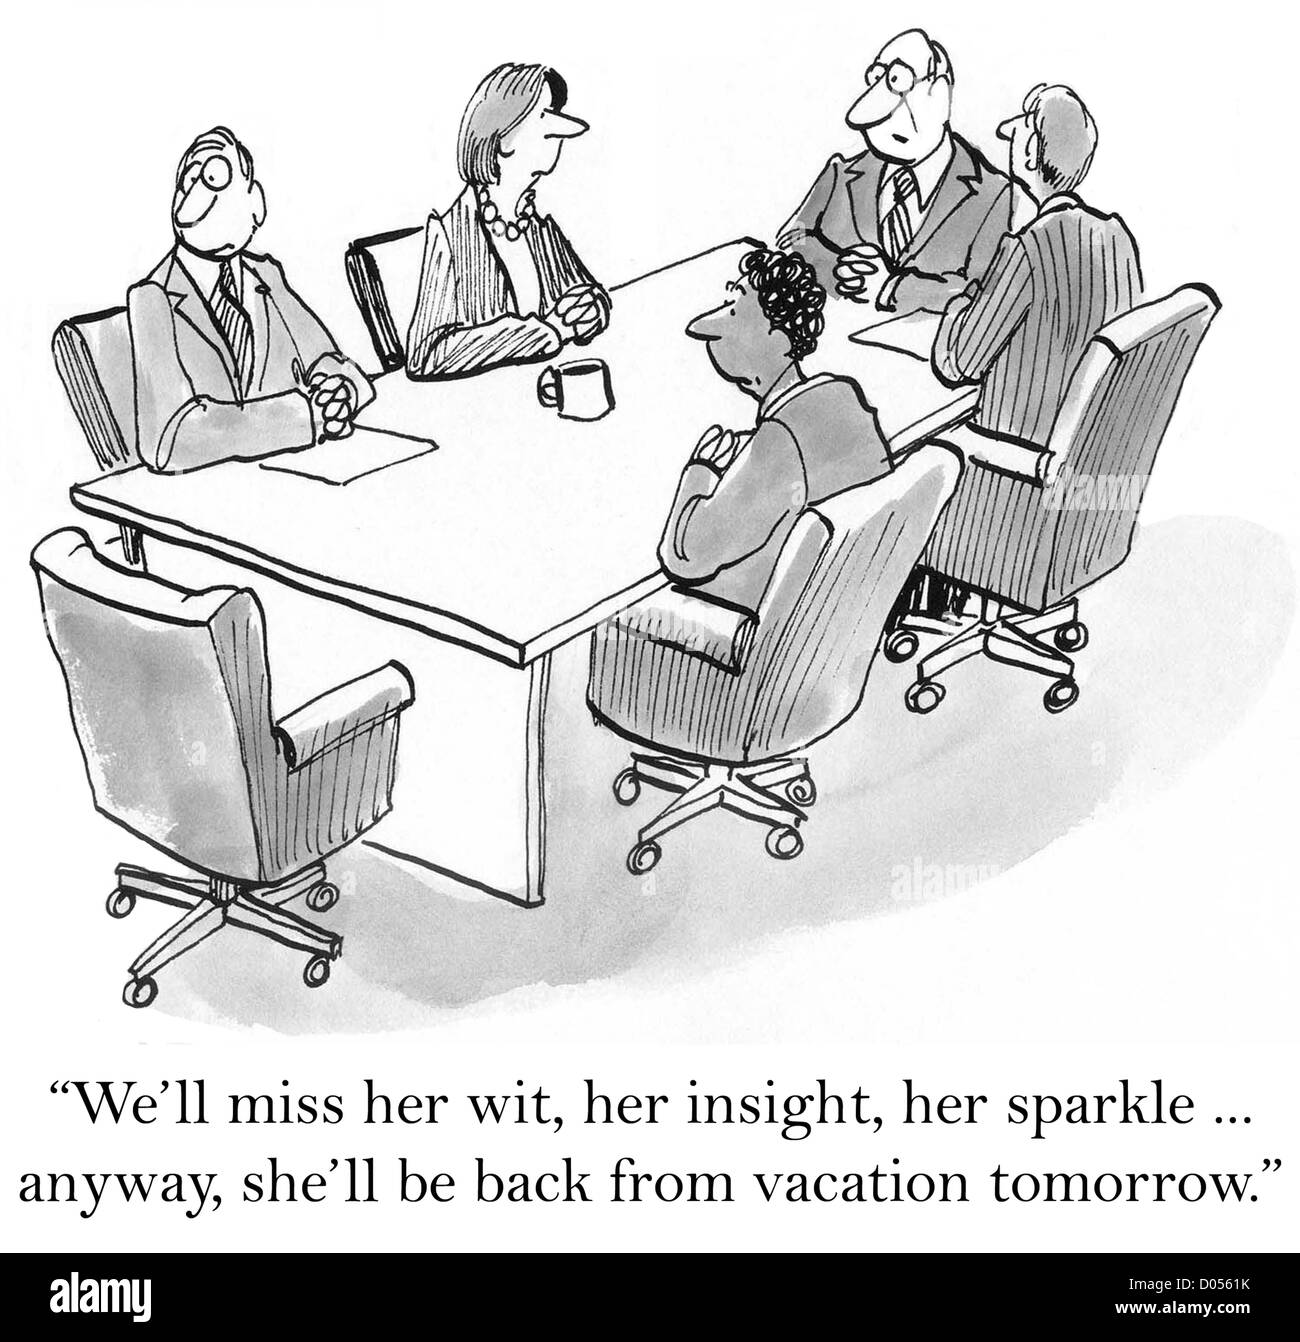 'We'll miss her wit, her insight, her sparkle... anyway, she'll be back from vacation tomorrow.' Stock Photo